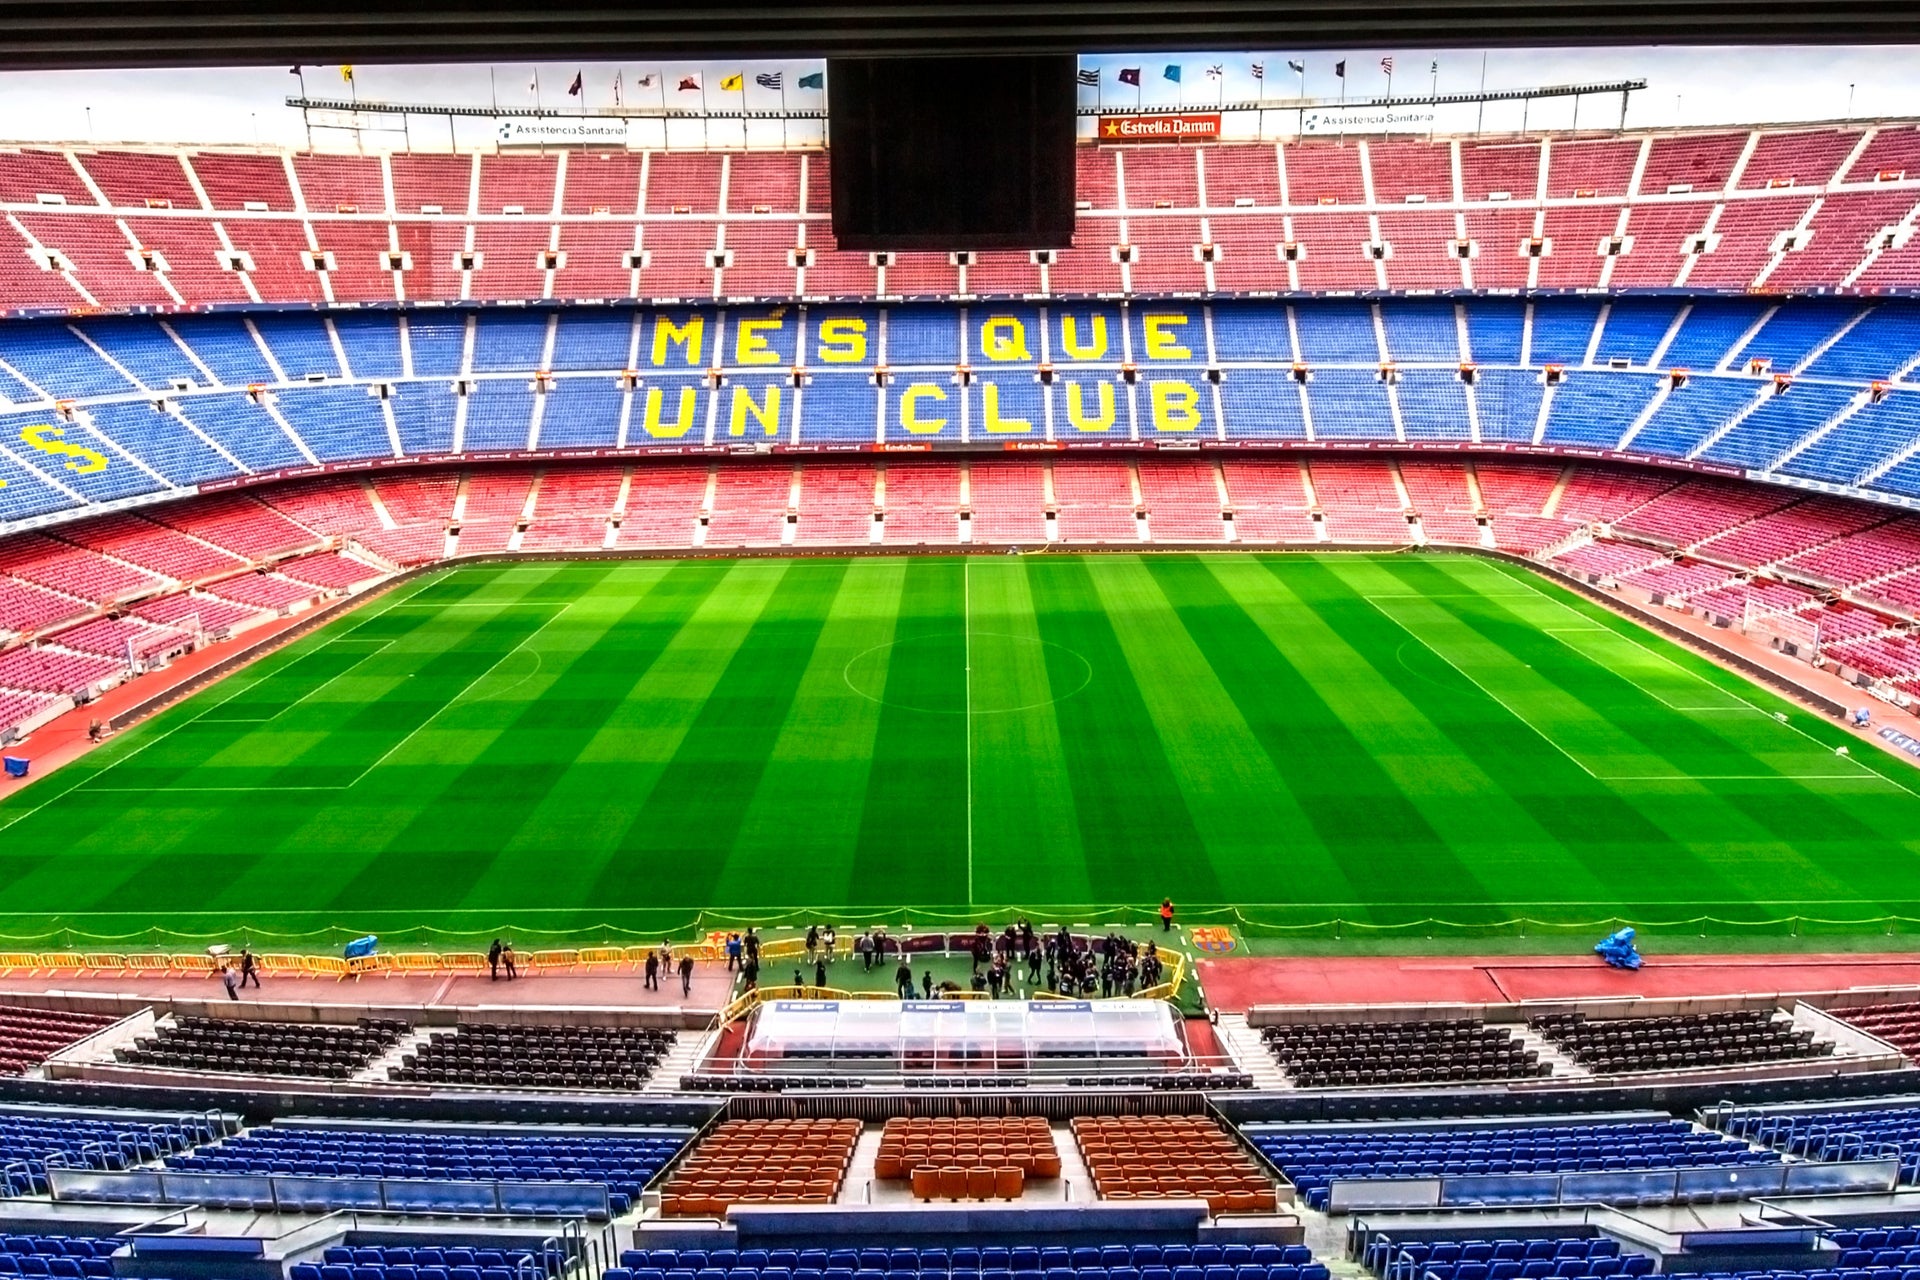 Guided Tour of Spotify Camp Nou Stadium